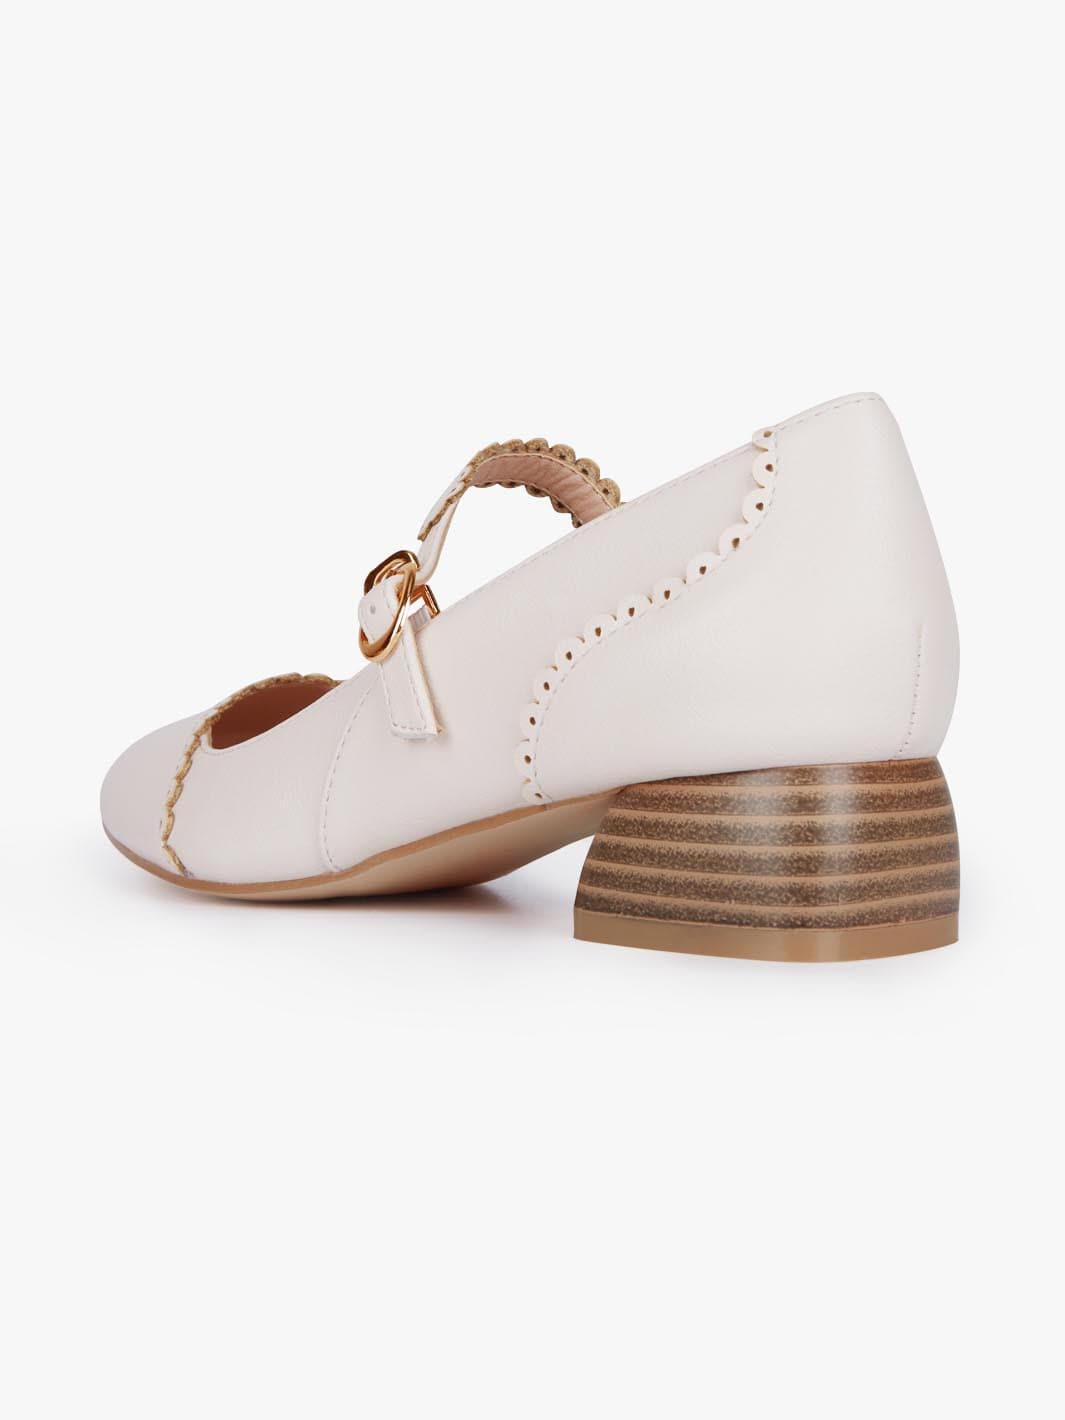 Ecosusi Vintage - vintage inspired #ecosusi shoes. Easy to match